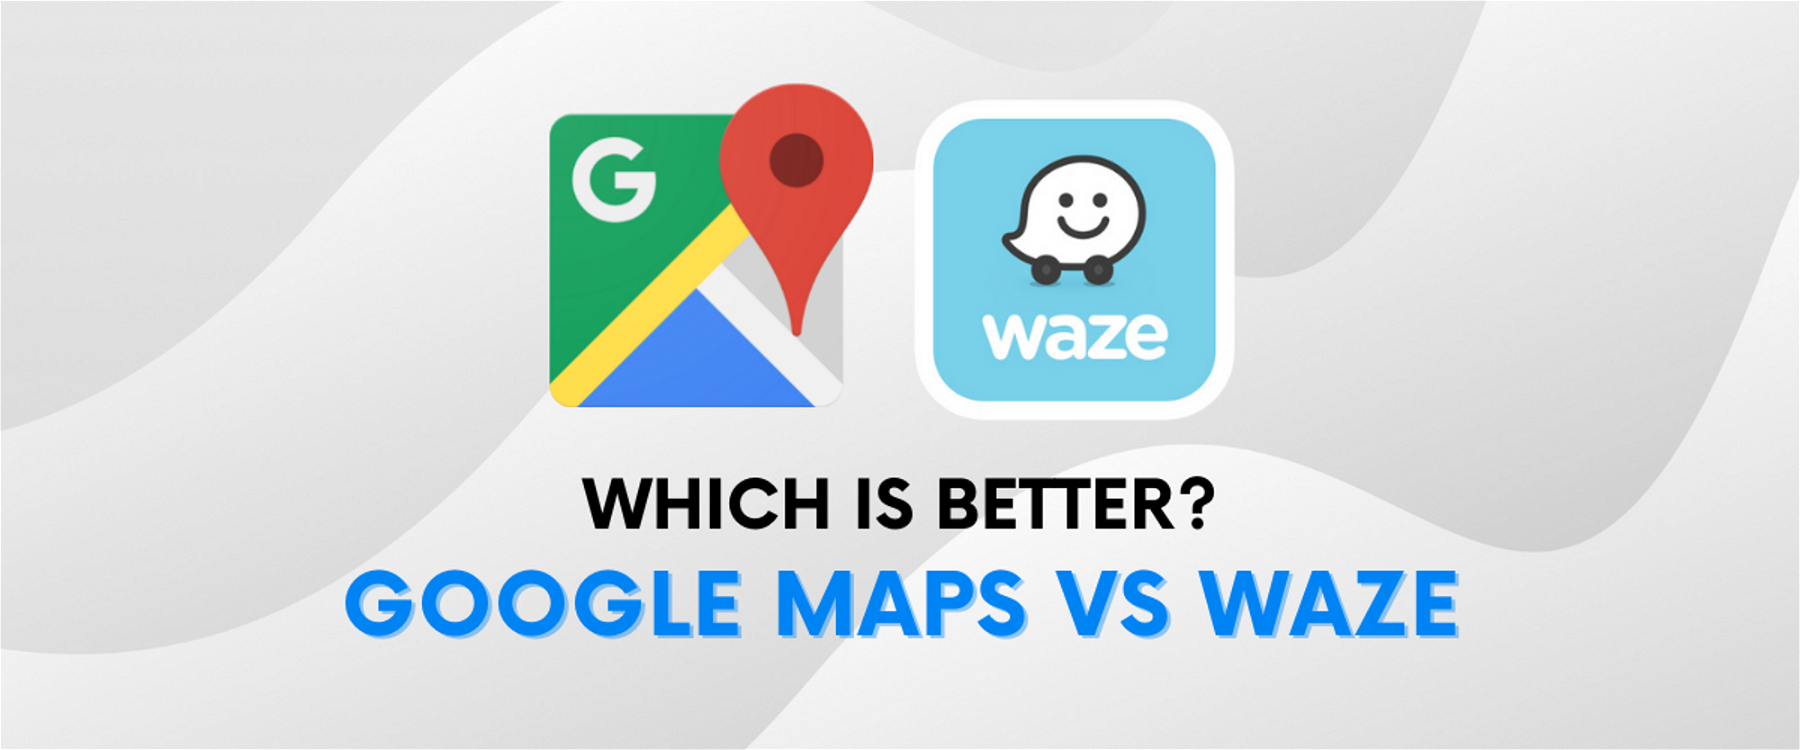 Which Is Better? Google Maps Or Waze? 